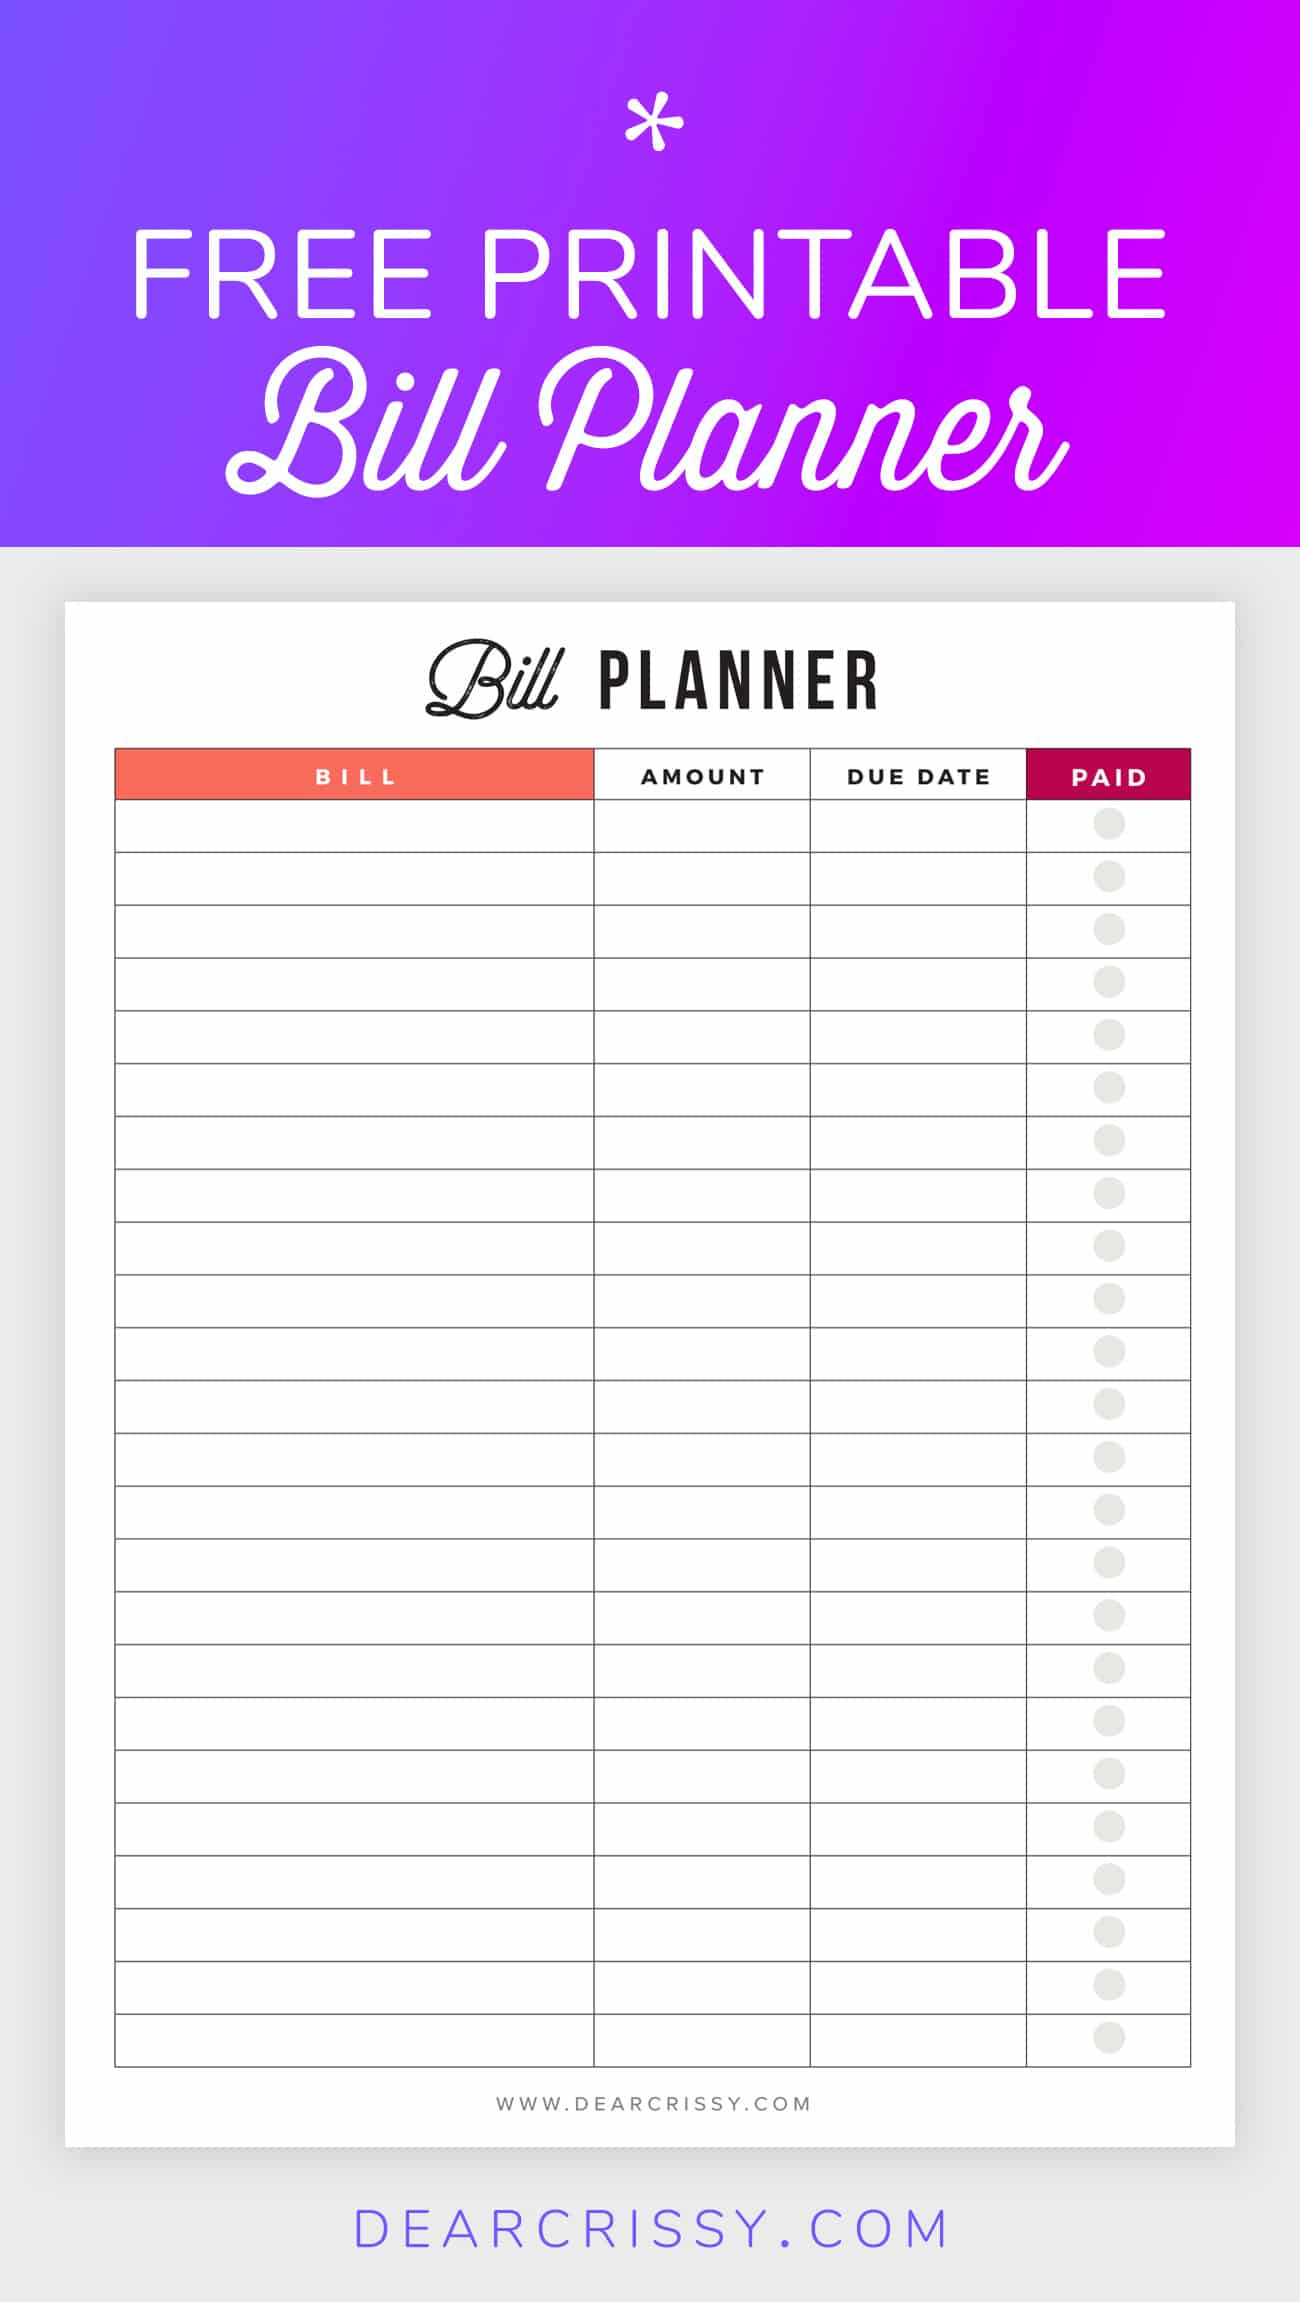 Bill Planner Printable  Pay Down Your Bills This Year! inside Free Printable Bill Calendar